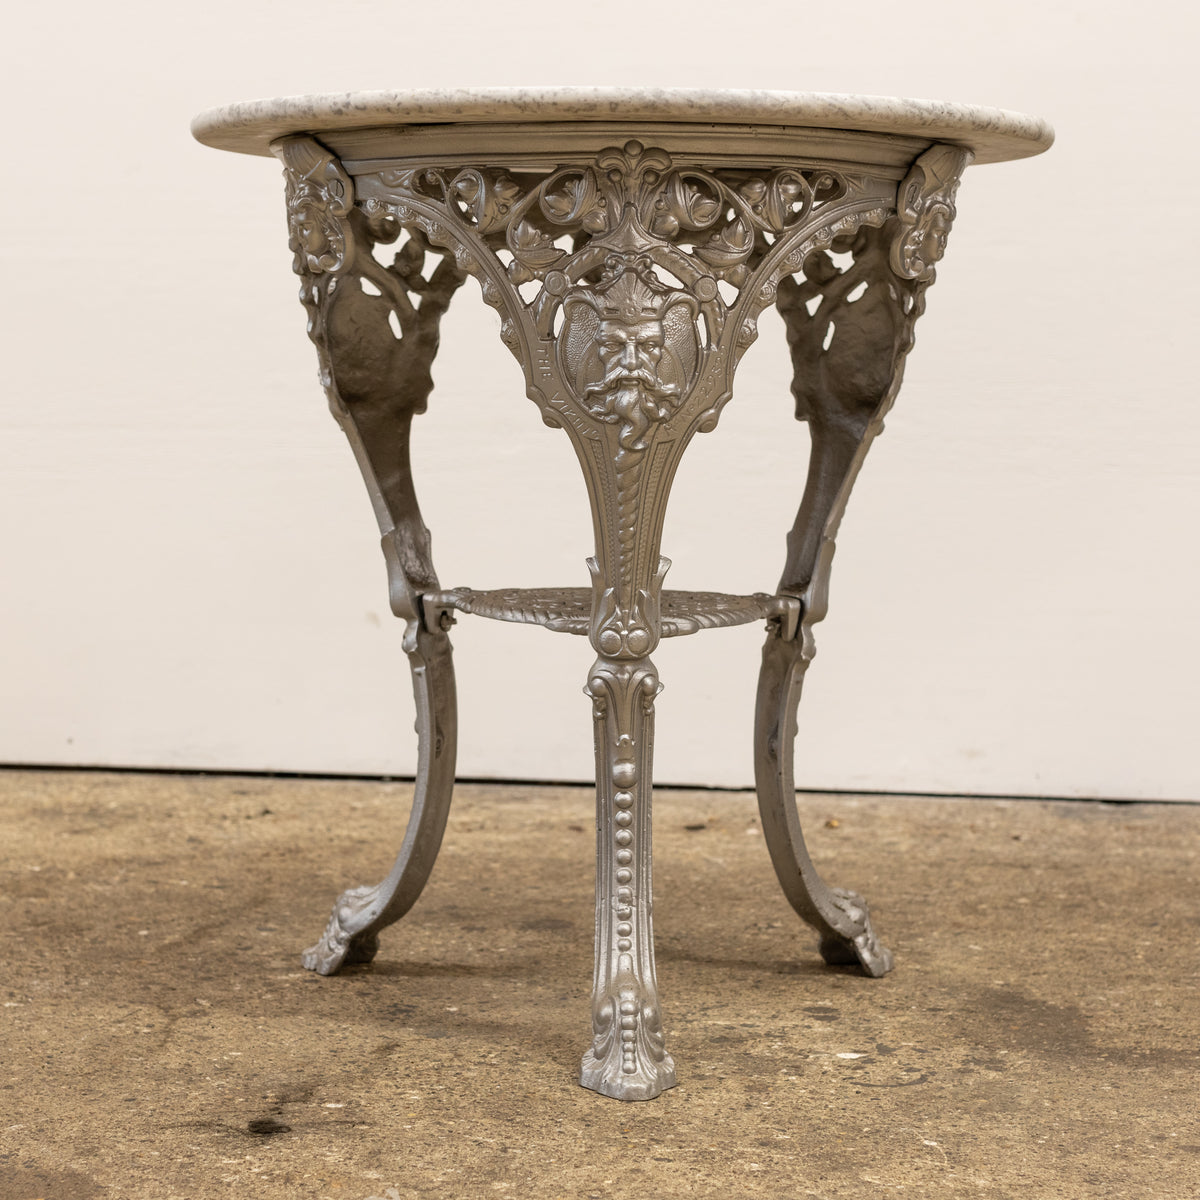 Antique Cast Iron Round Table with Marble Top | The Viking | The Architectural Forum